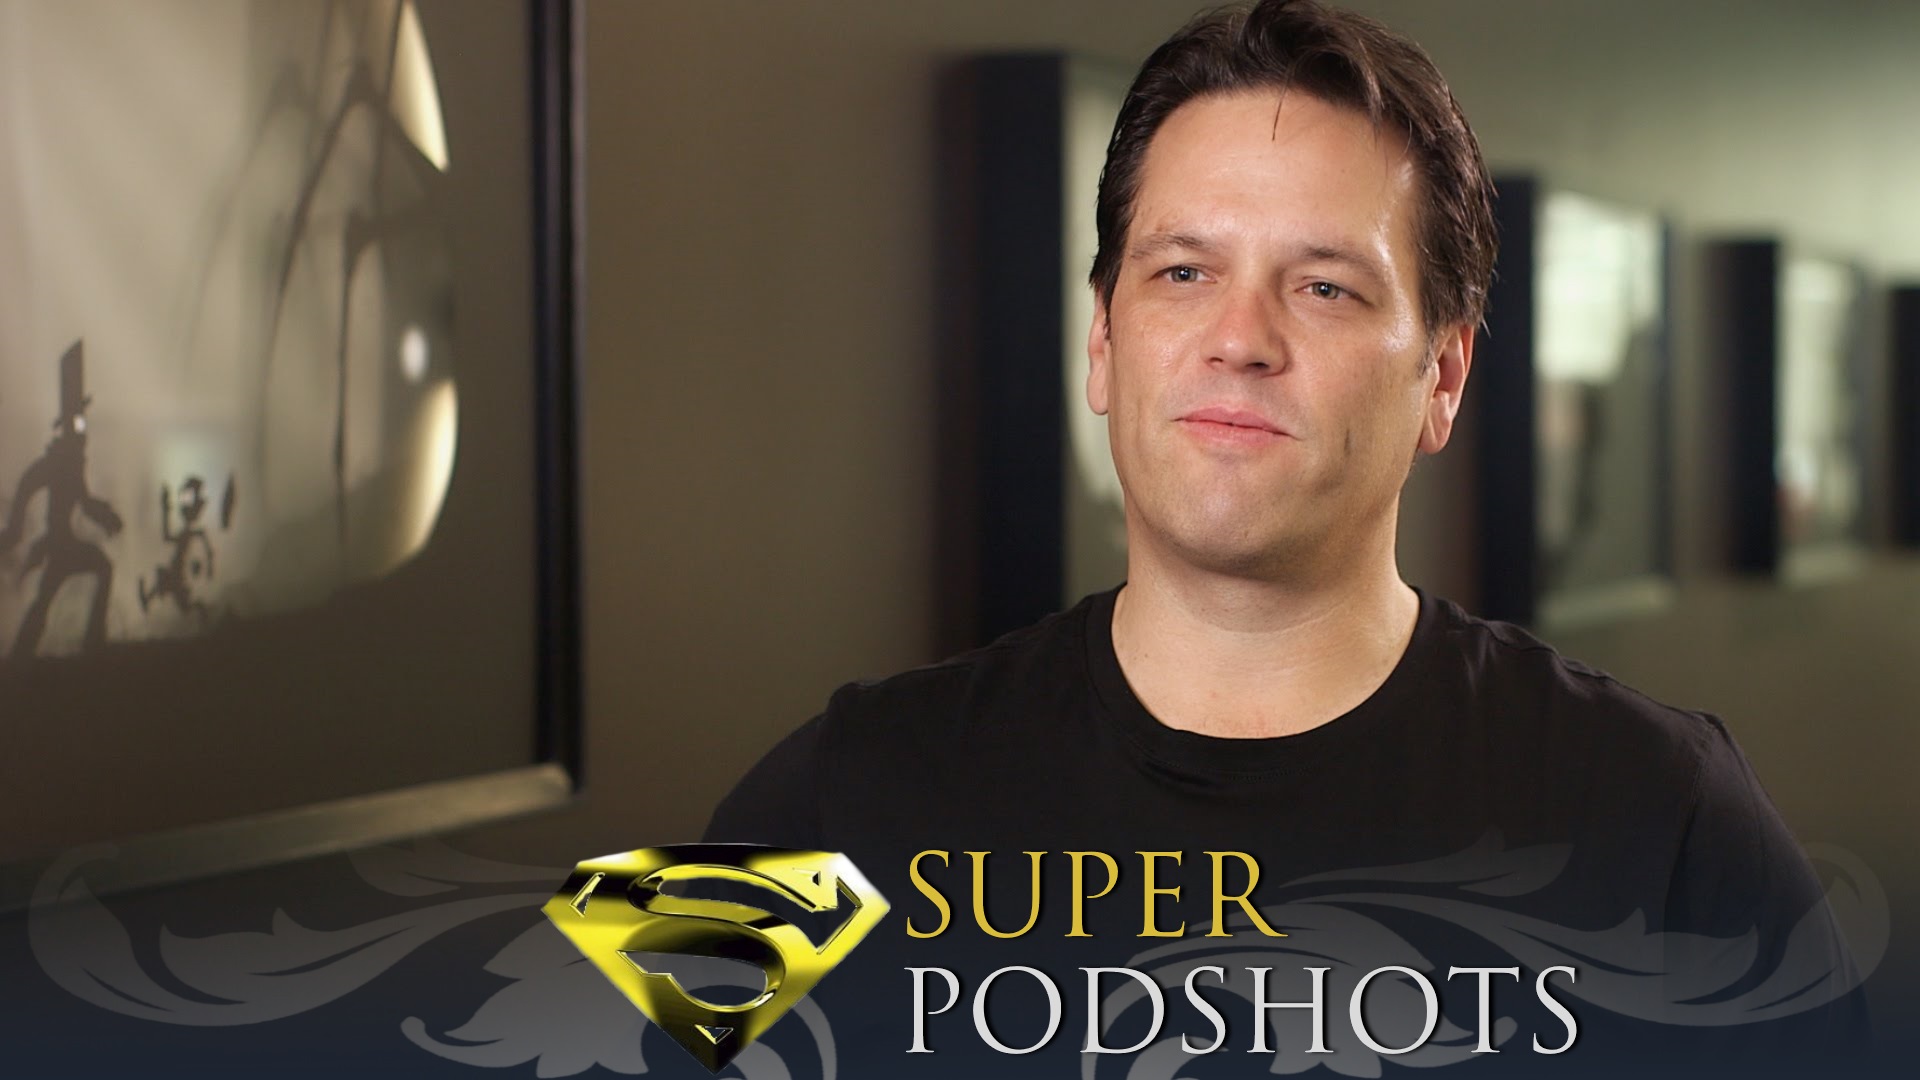 Super Podshots Ep. 66 - Is Xbox A Sleeping Giant Waiting For E3 2017?